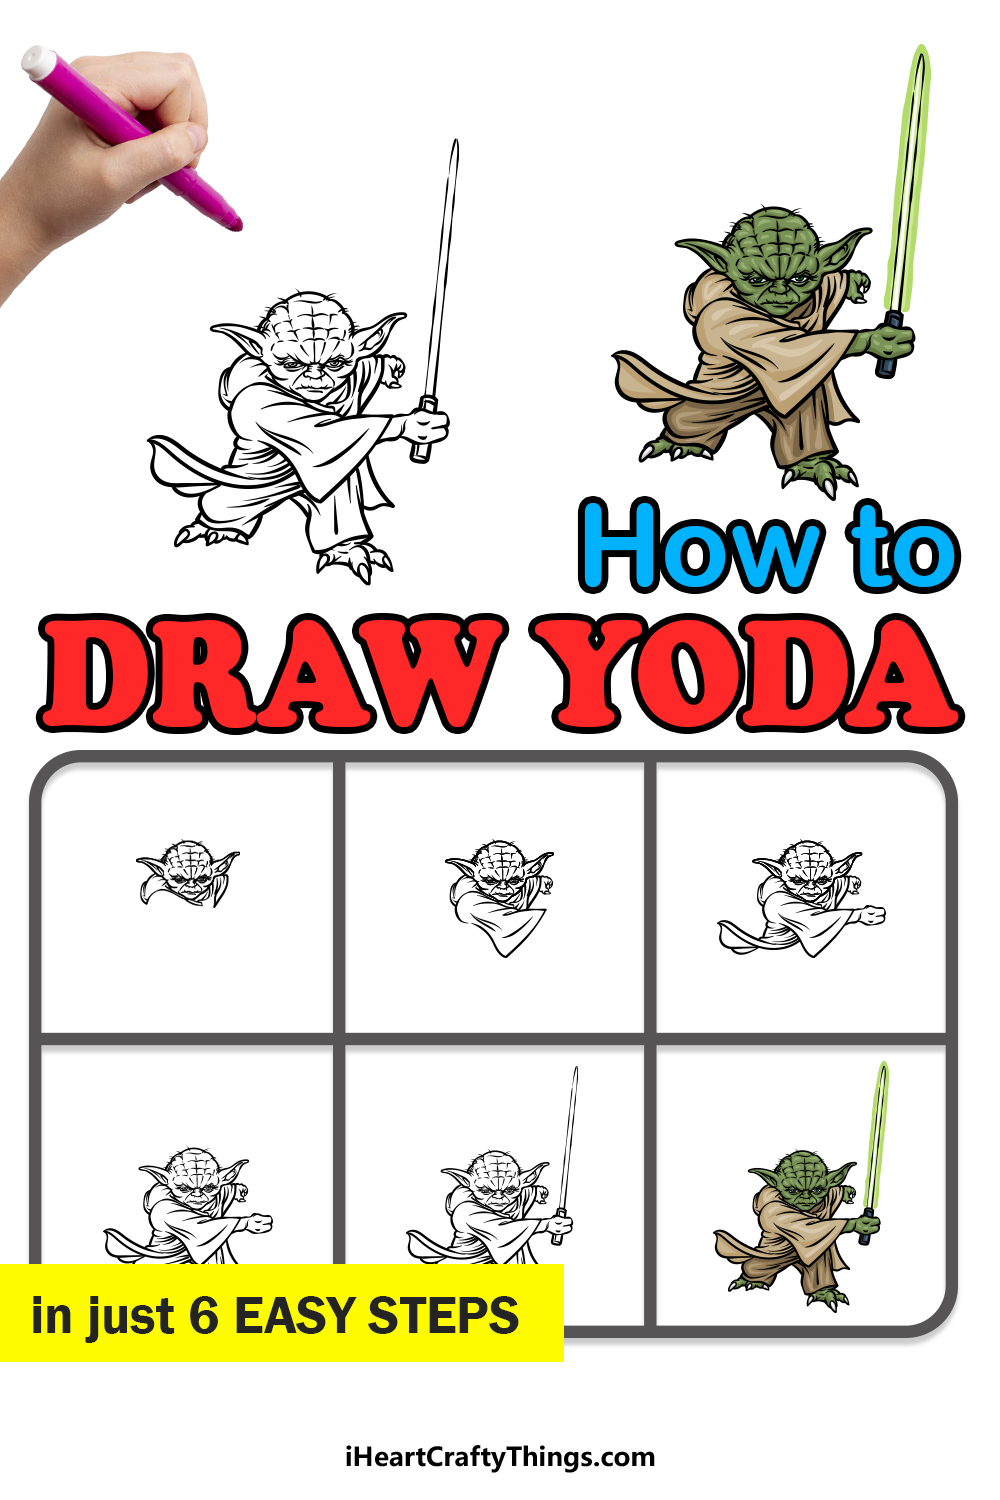 how to draw Yoda in 6 easy steps